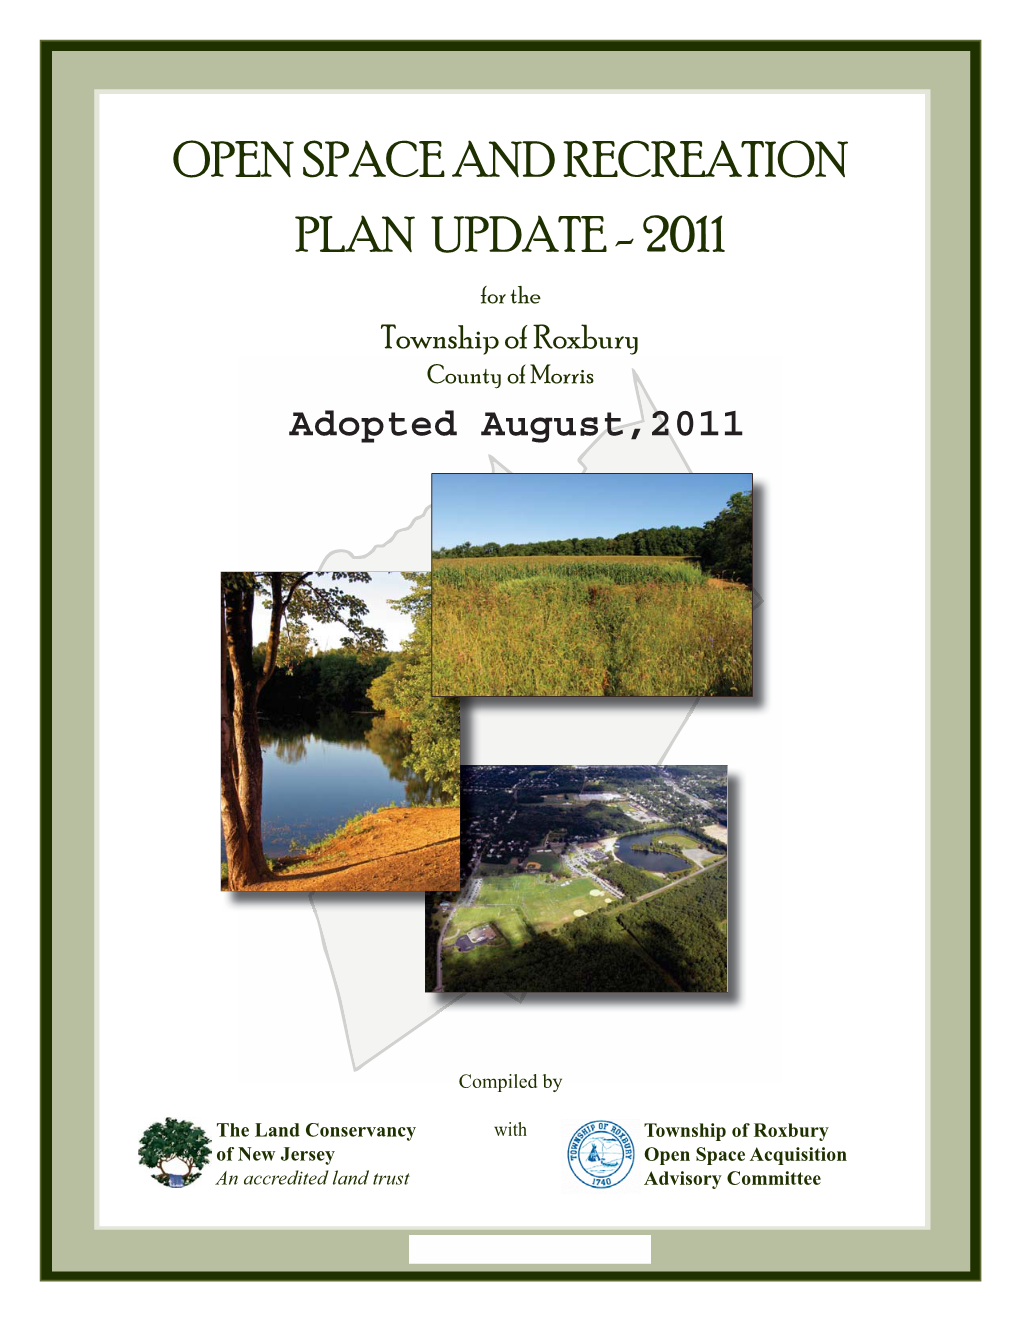 Open Space and Recreation Plan Update - 2011